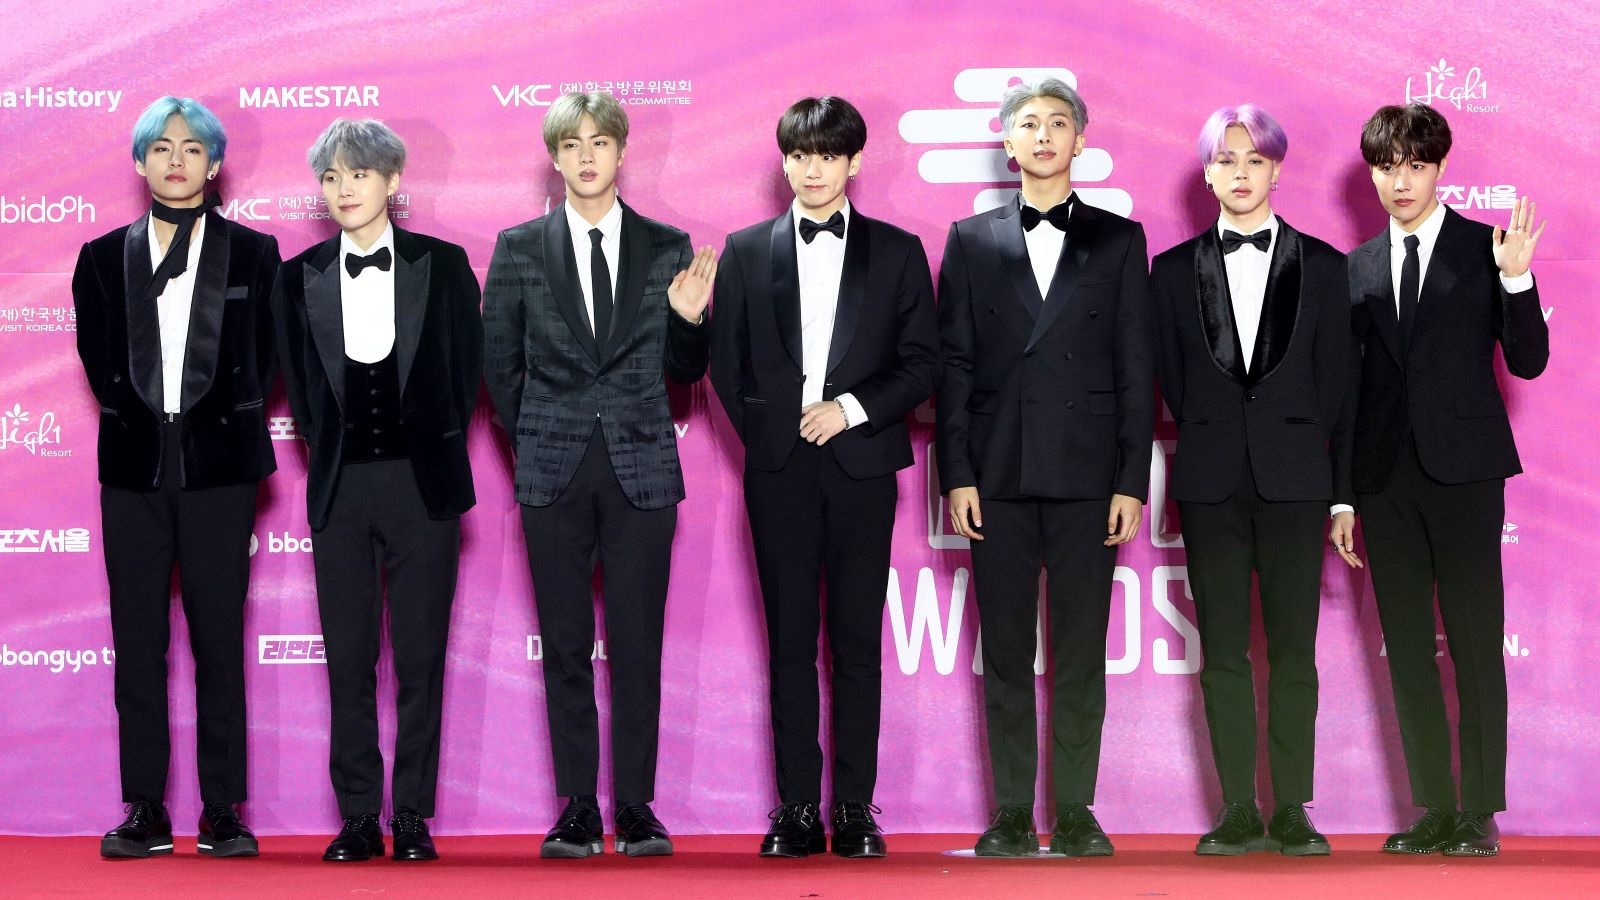 South Korean boy band BTS attends the Seoul Music Awards in Seoul, South Korea on January 15, 2019. (Photo by Chung Sung-Jun/Getty Images)